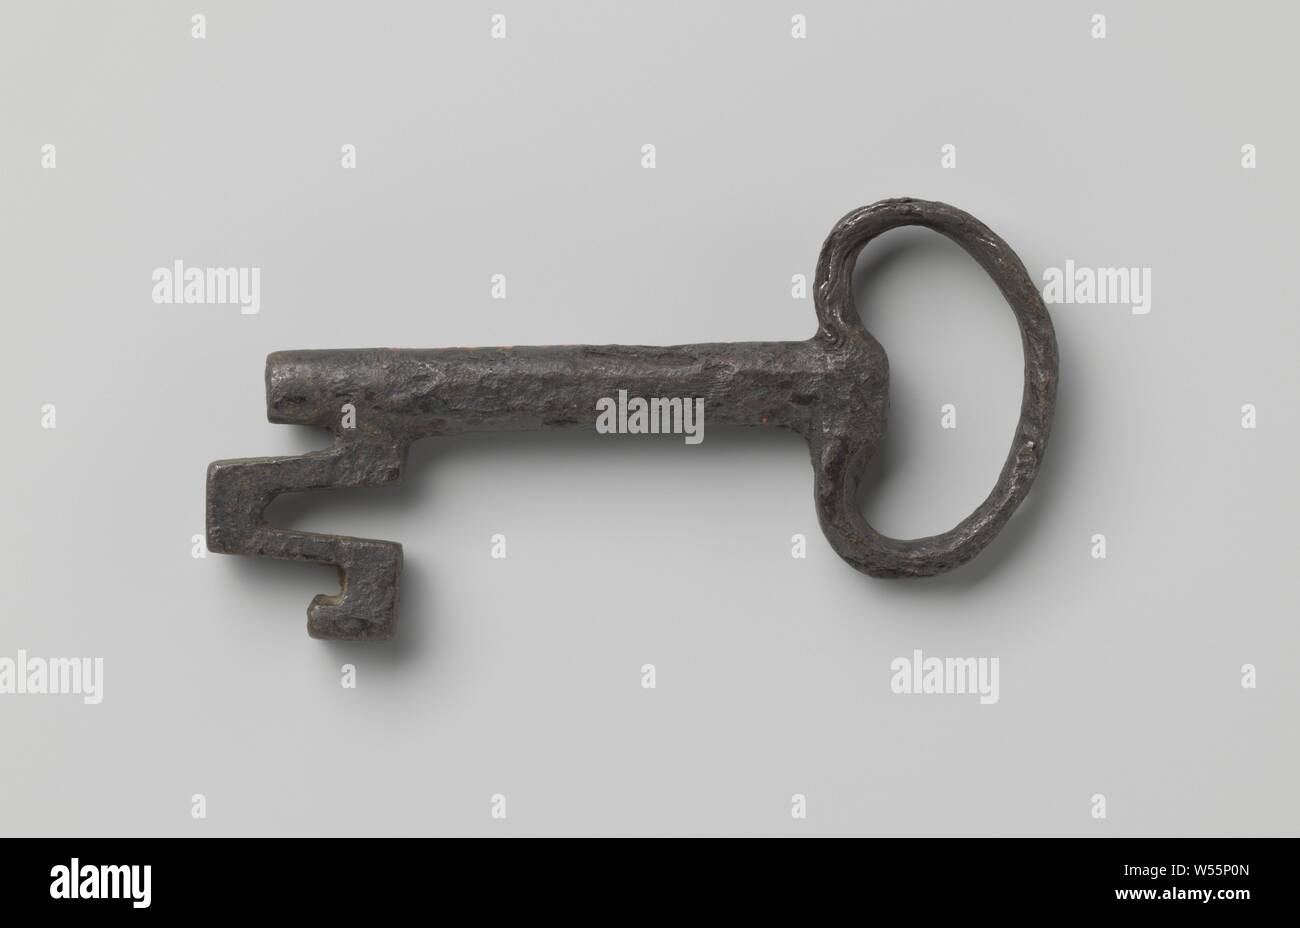 Key with bean-shaped eye. The V-shaped cut beard continues past the shaft., 1500 - 1600, iron (metal), l 8 cm × w 3.5 cm Stock Photo